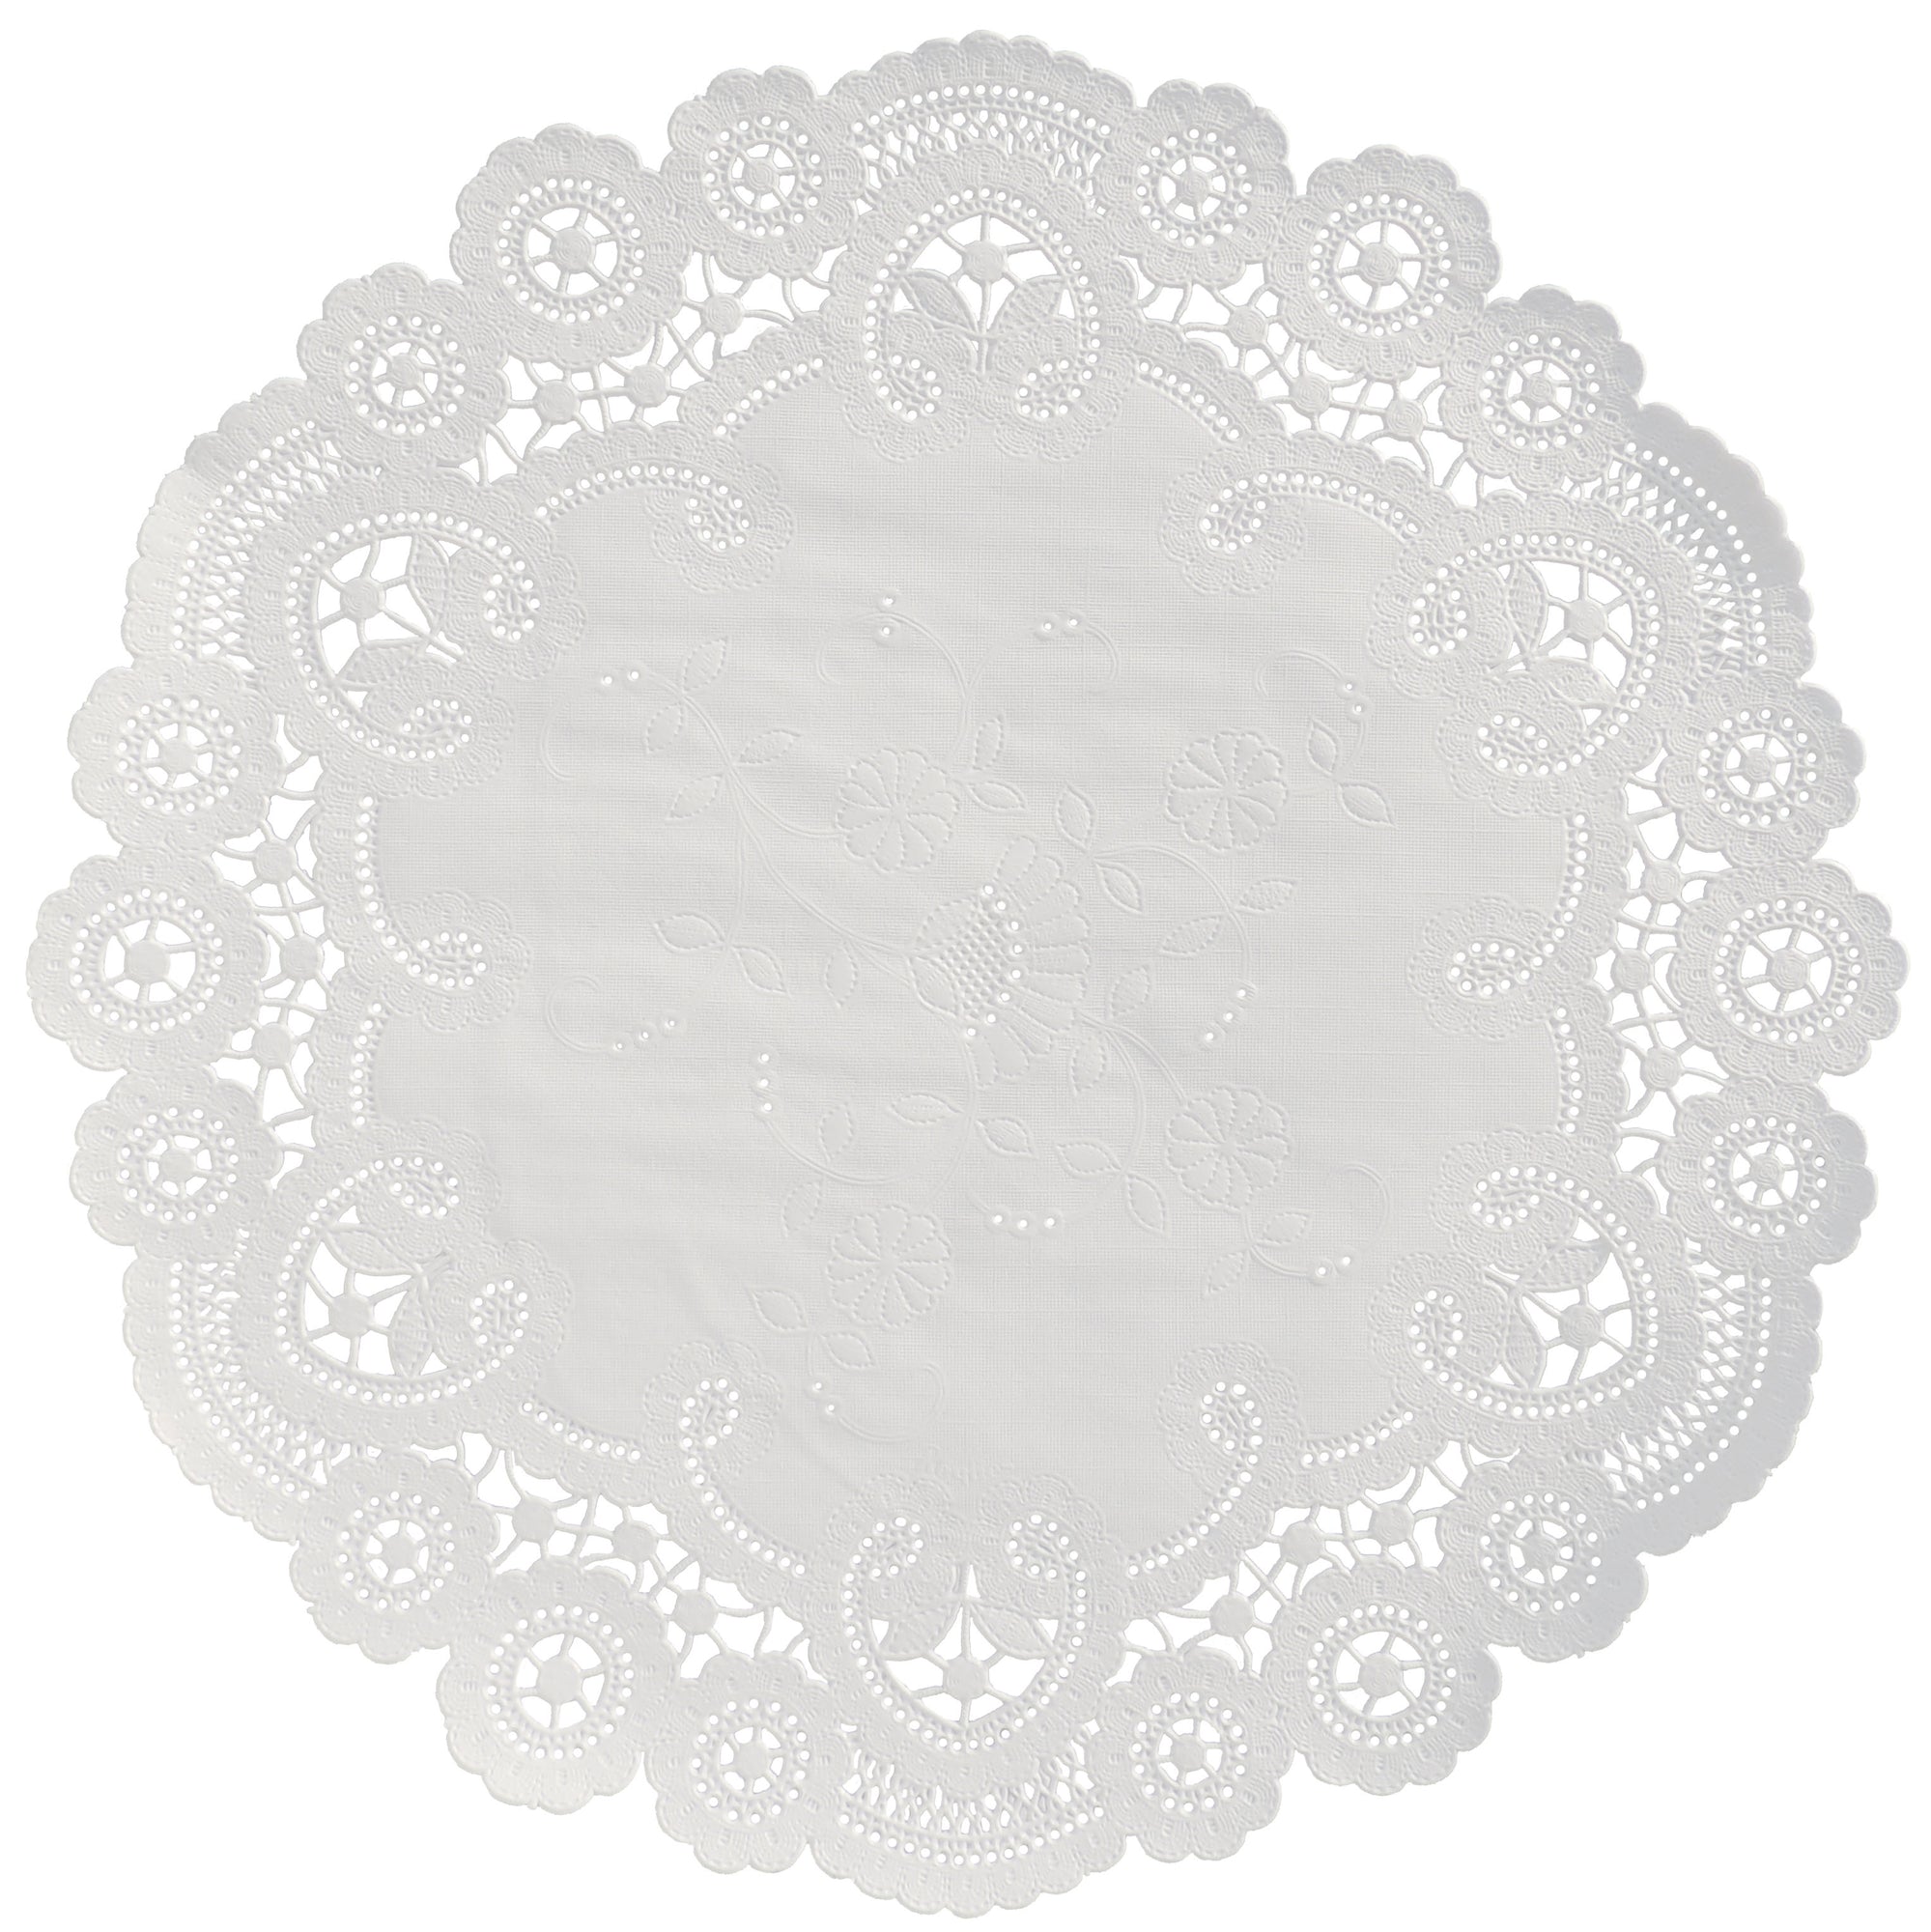 10 Inch White French Lace Paper Doilies 50 Count – PEPPERLONELY